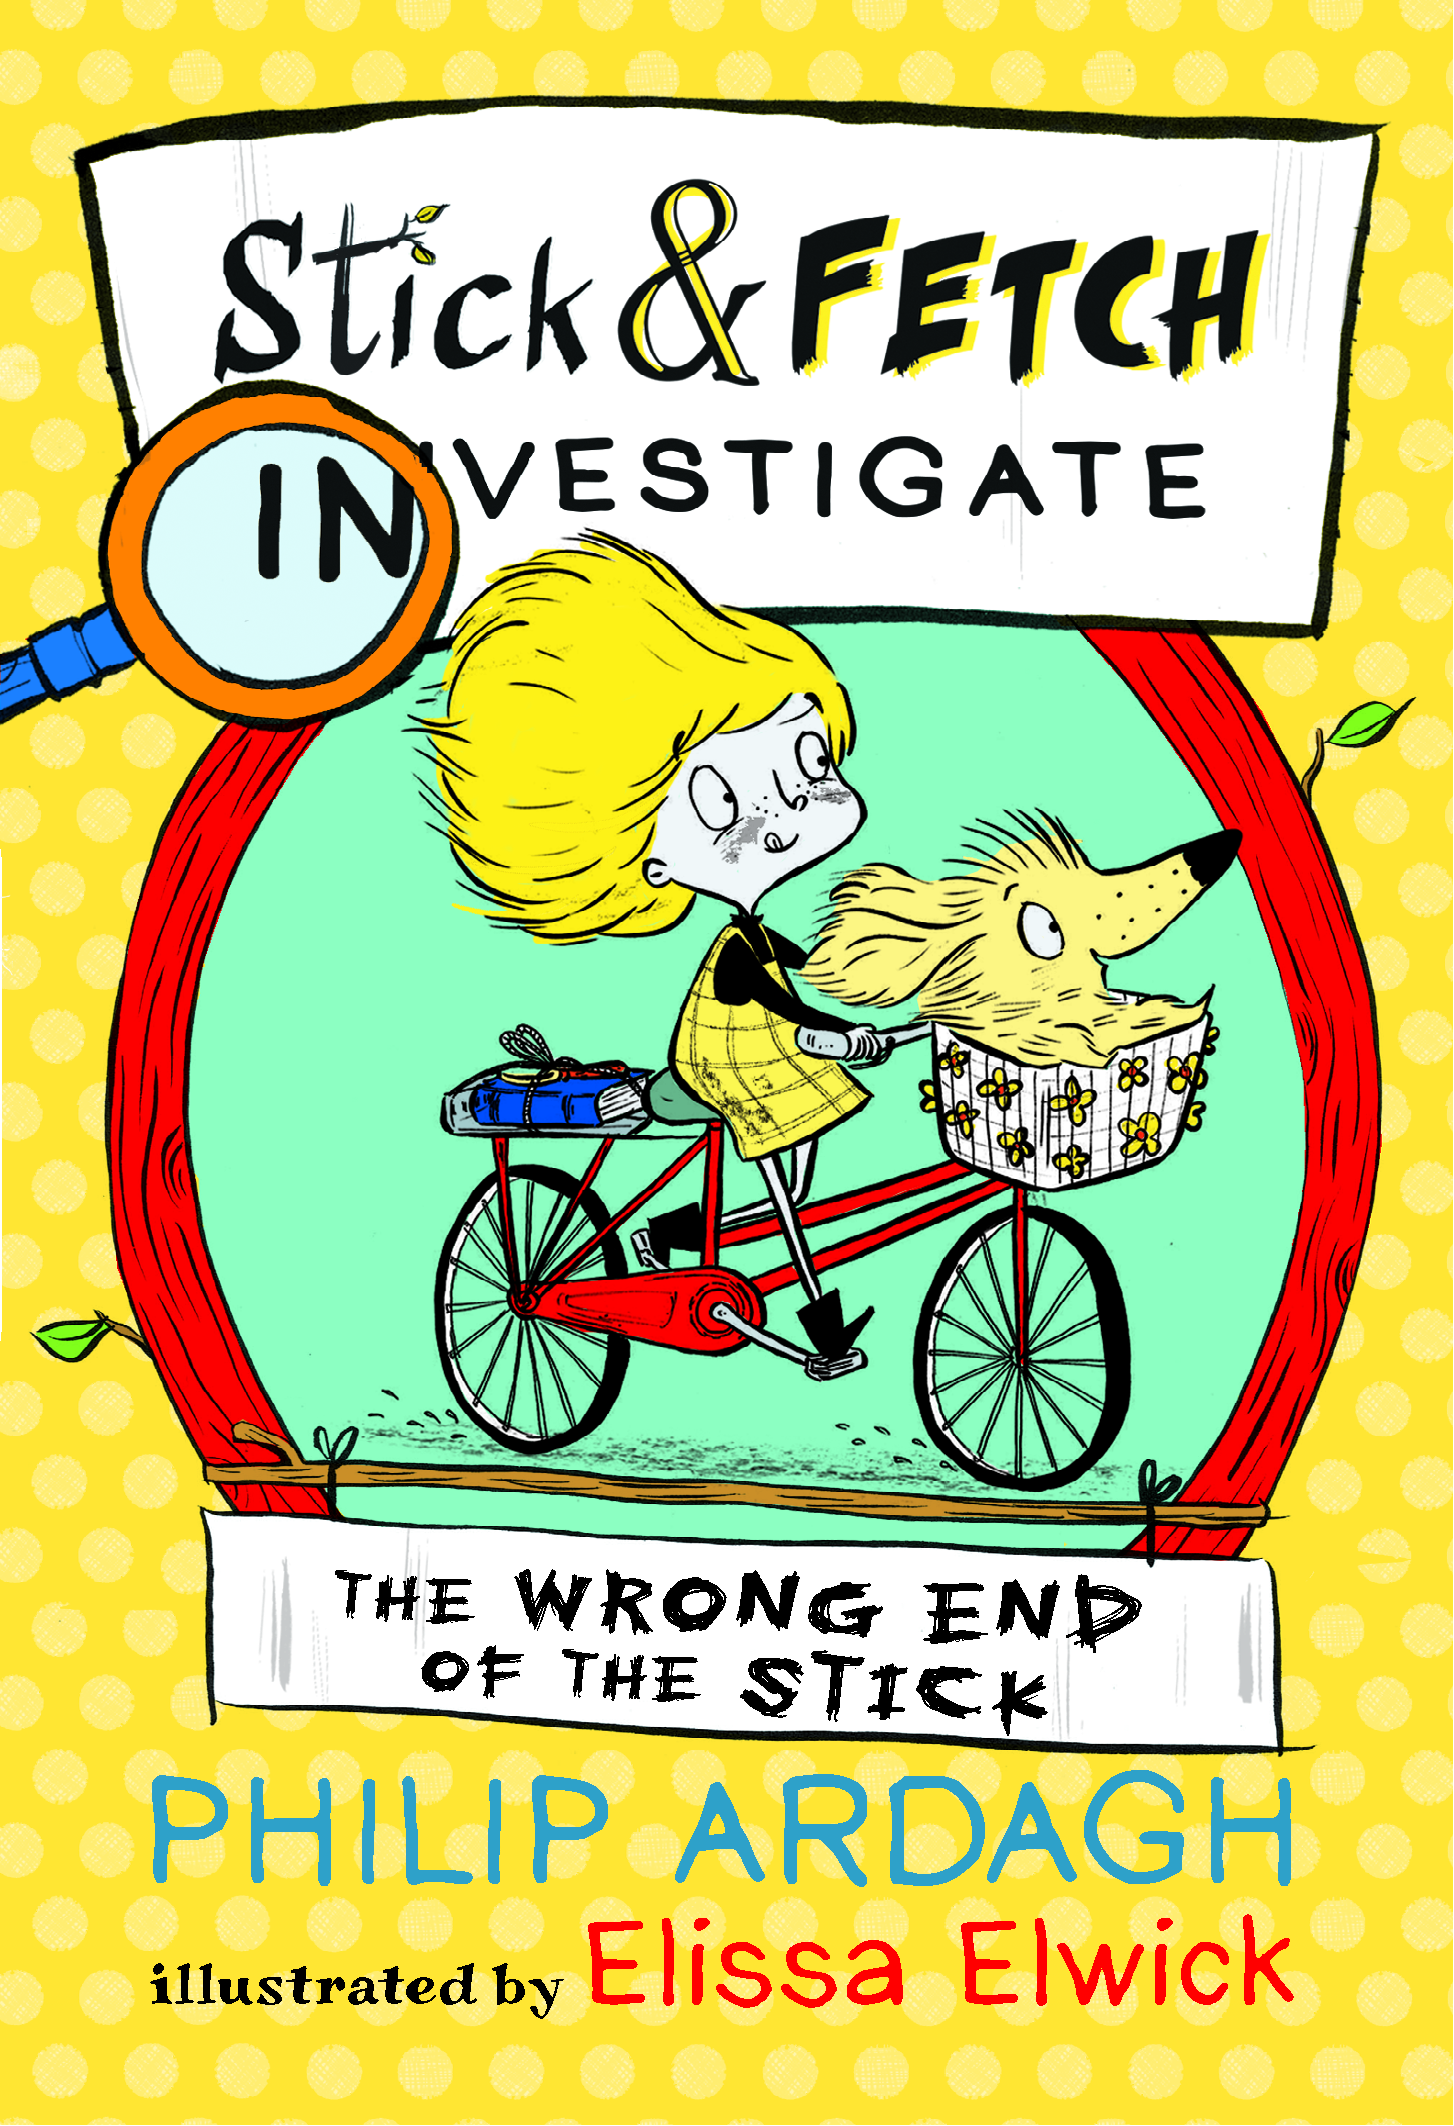 The-Wrong-End-of-the-Stick-Stick-and-Fetch-Investigate